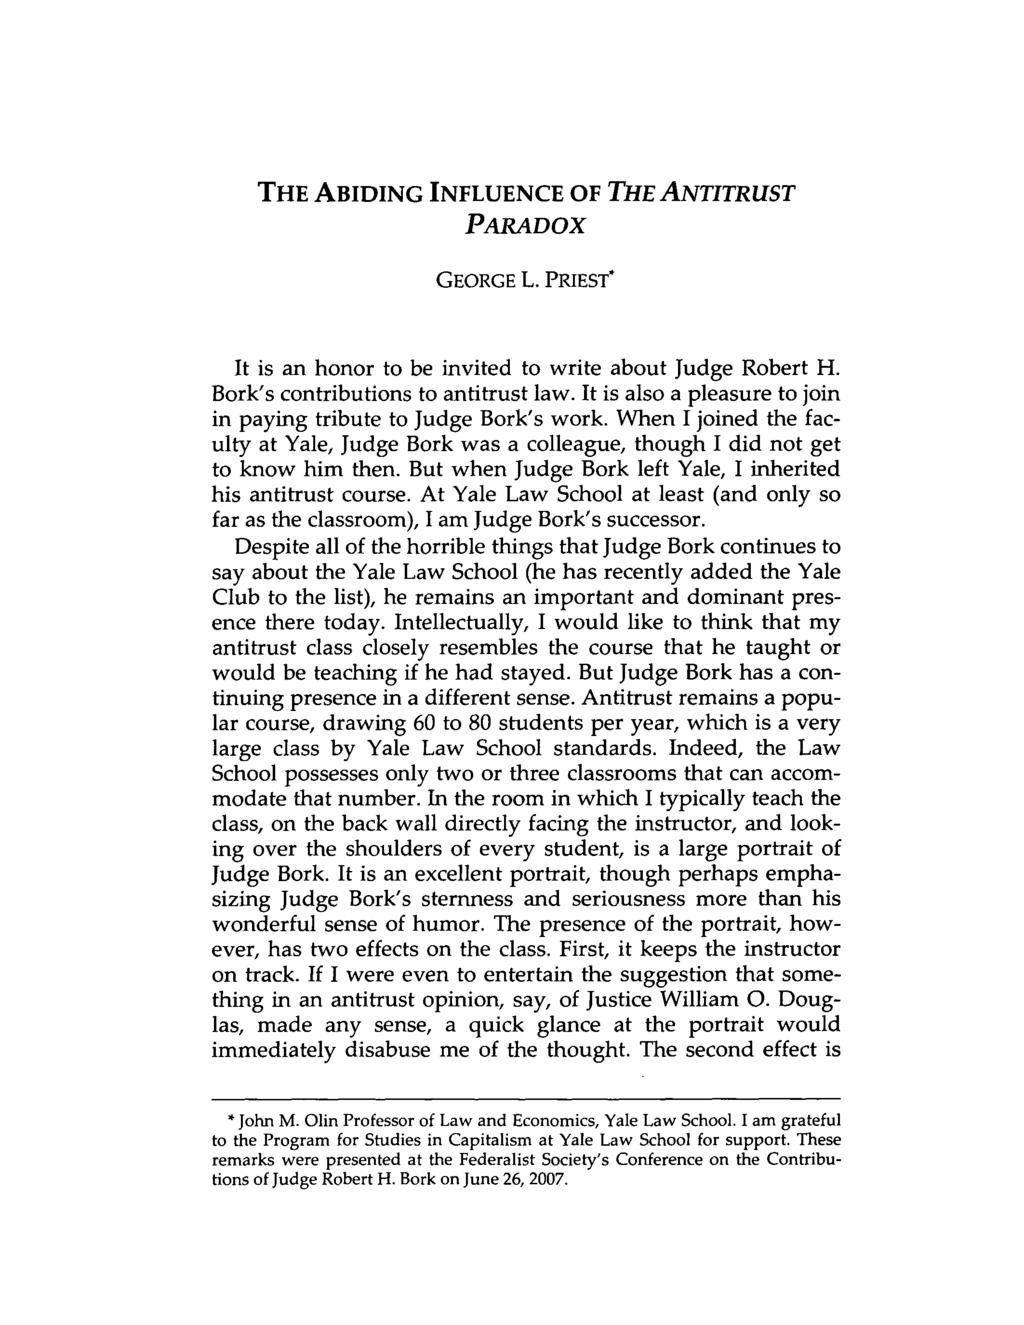 THE ABIDING INFLUENCE OF THE ANTITRUST PARADOX GEORGE L. PRIEST' It is an honor to be invited to write about Judge Robert H. Bork's contributions to antitrust law.